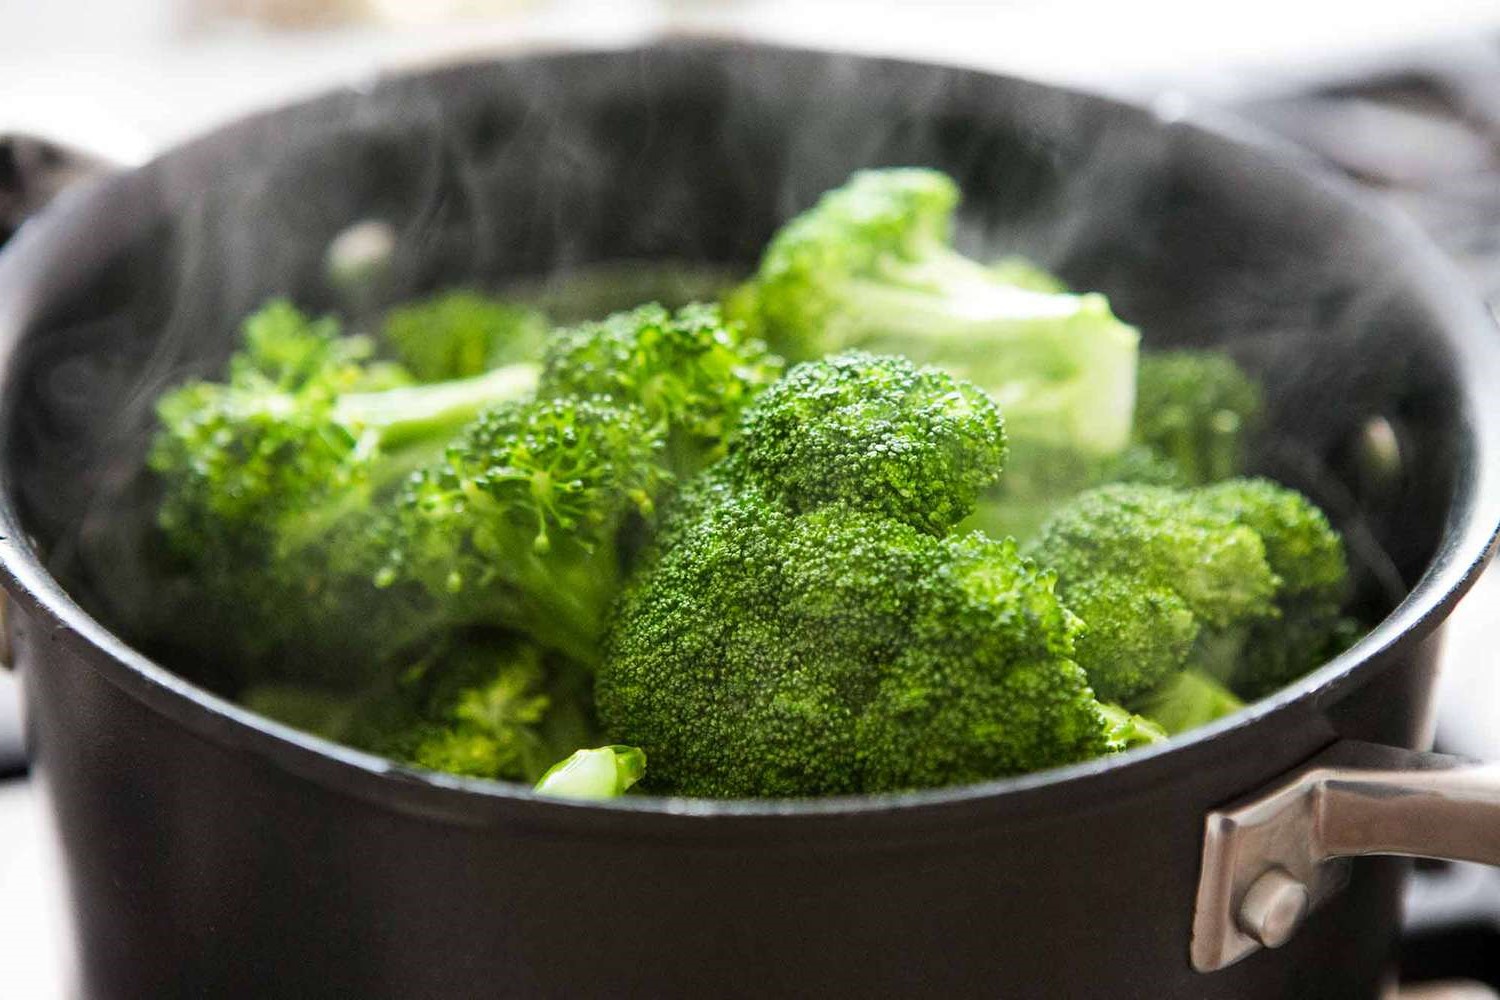 How To Steam Broccoli In The Microwave